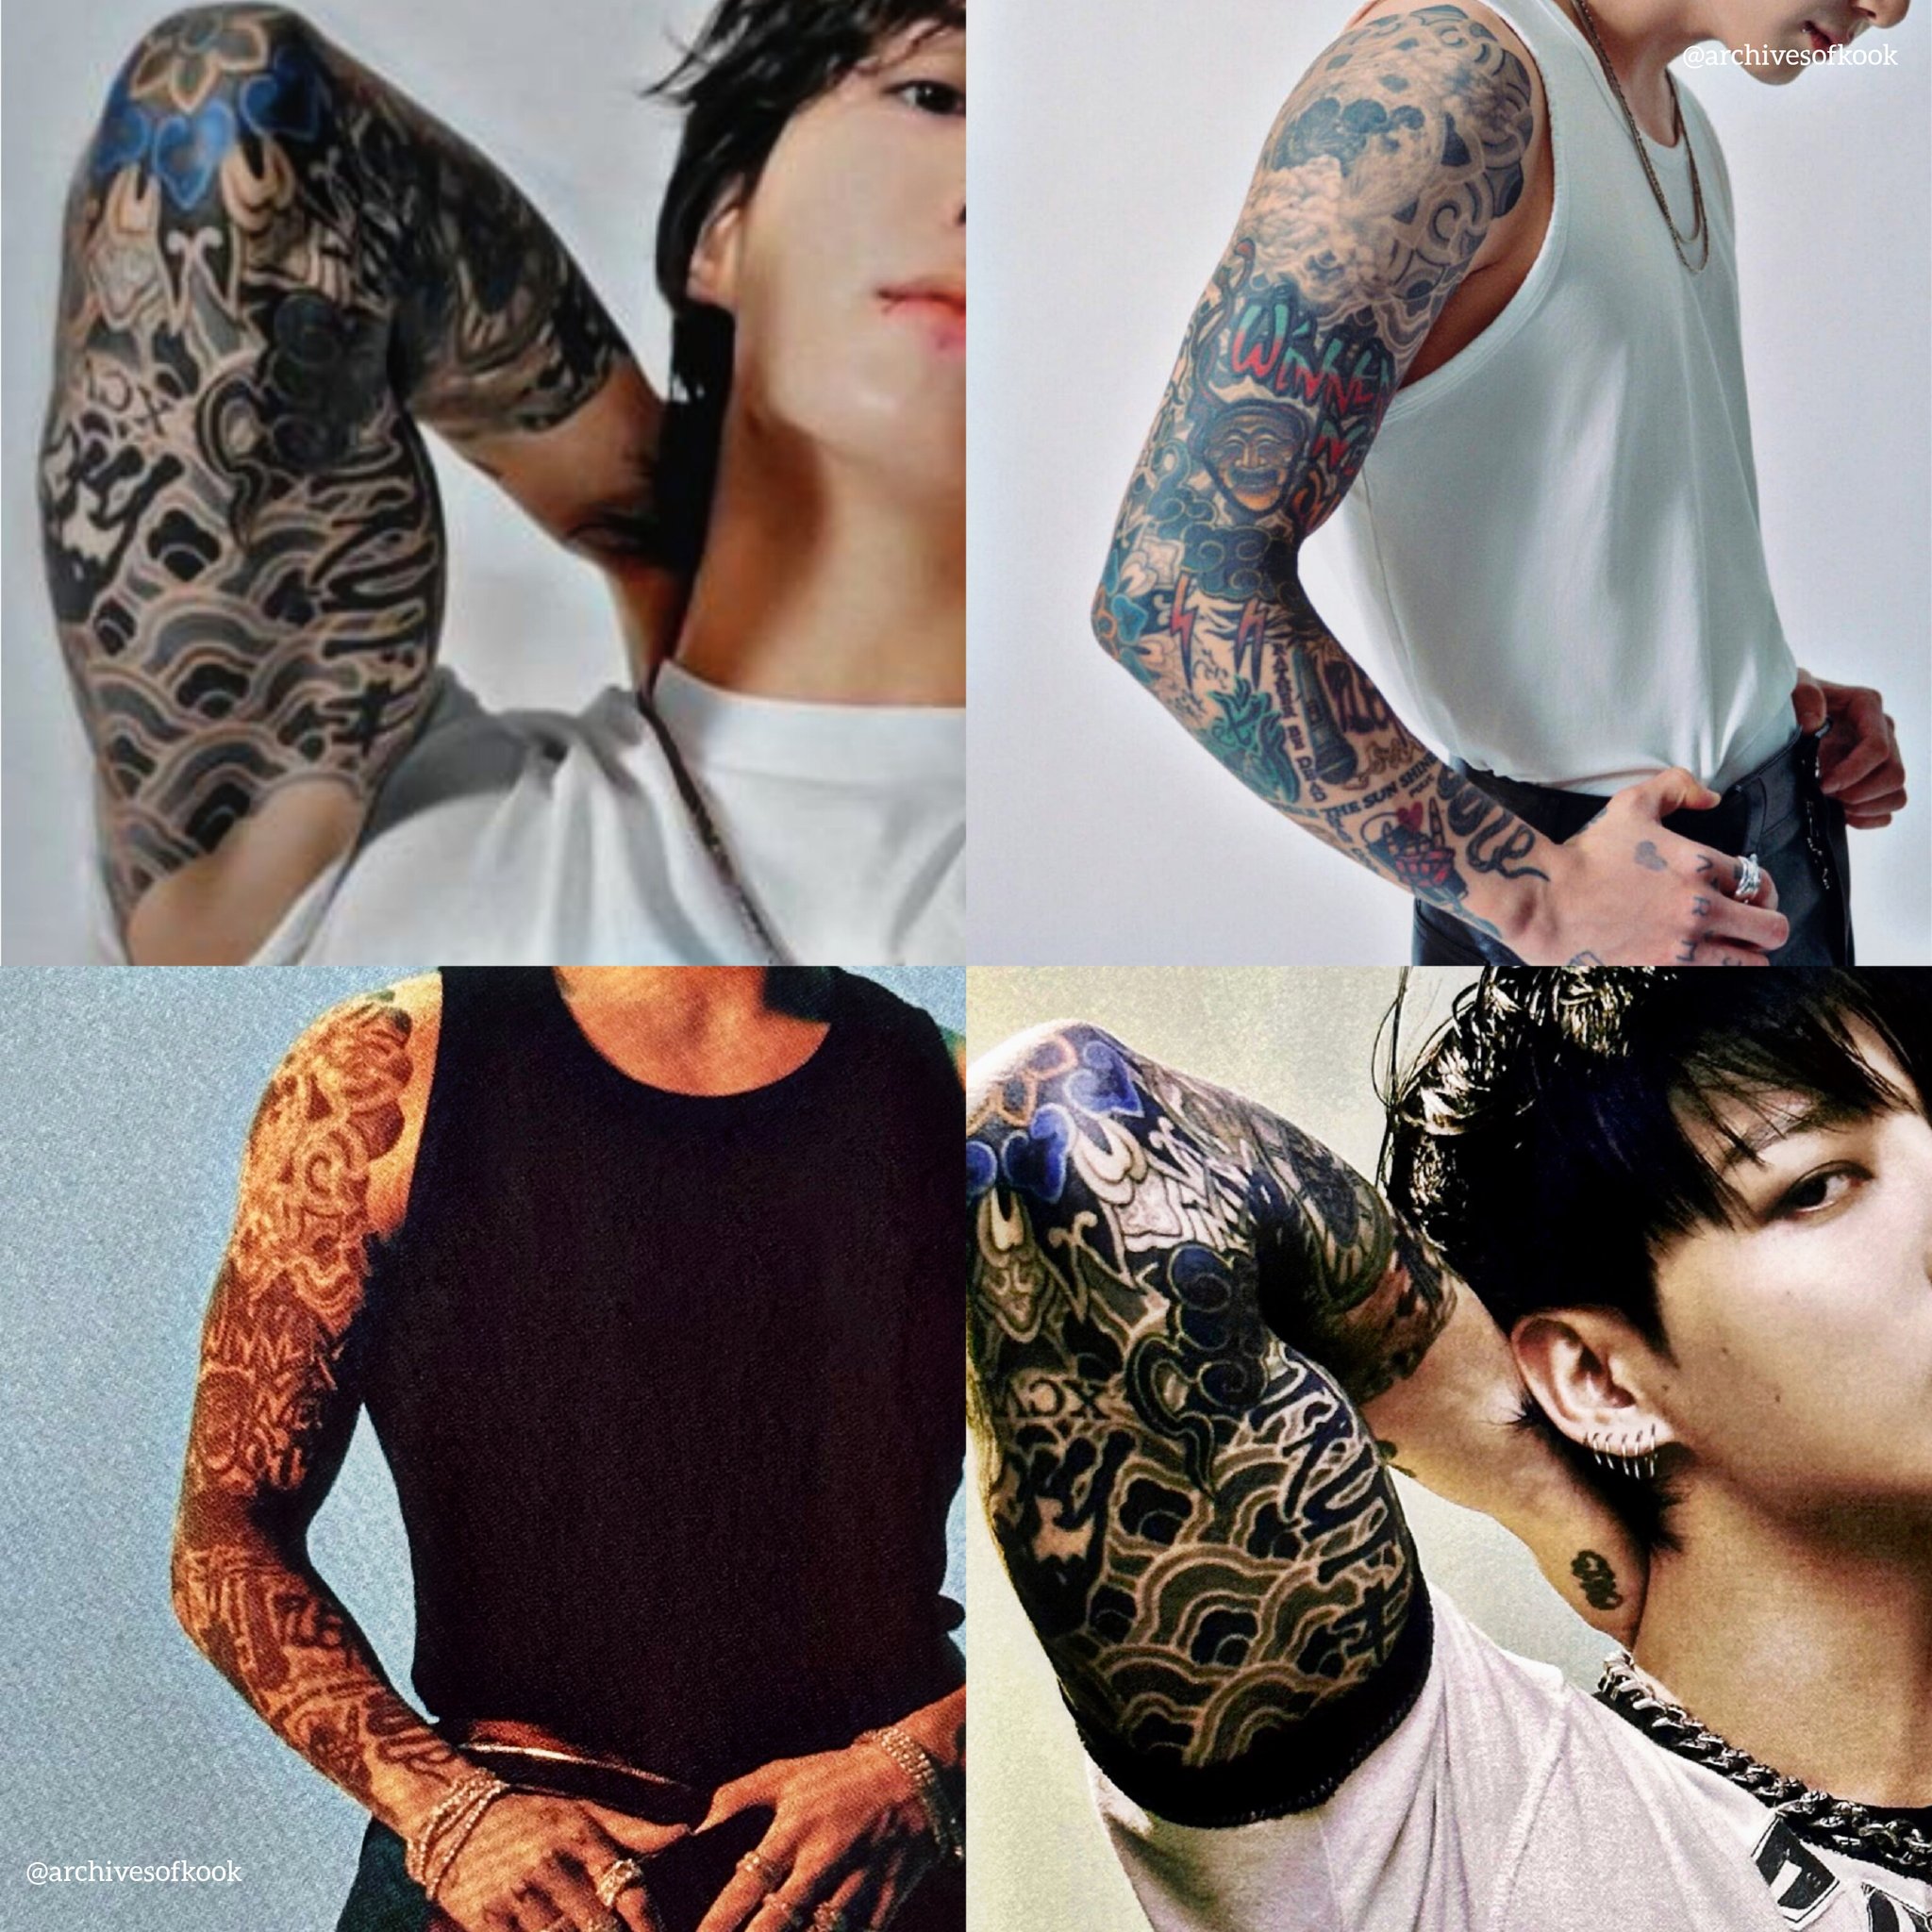 Jungkook Hand Tattoos: Pretty and Eye-catching Designs